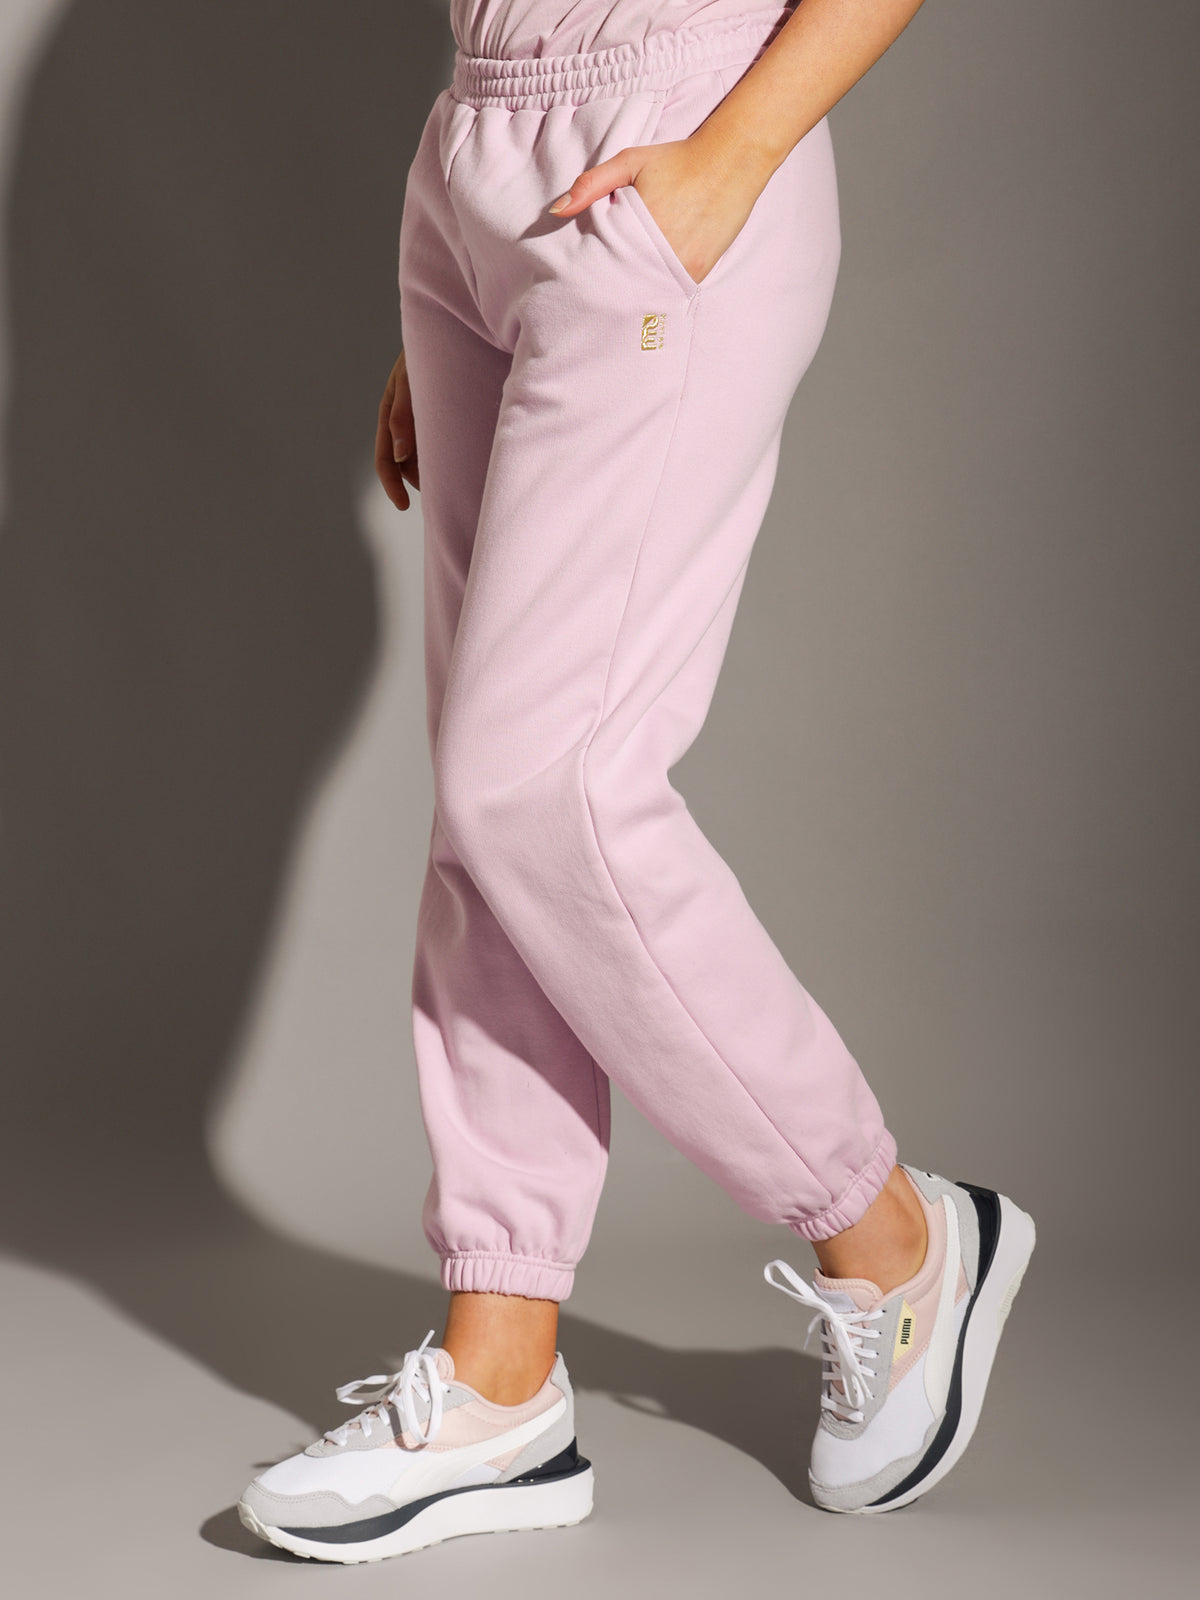 All Around Track Pants in Pink Lavender